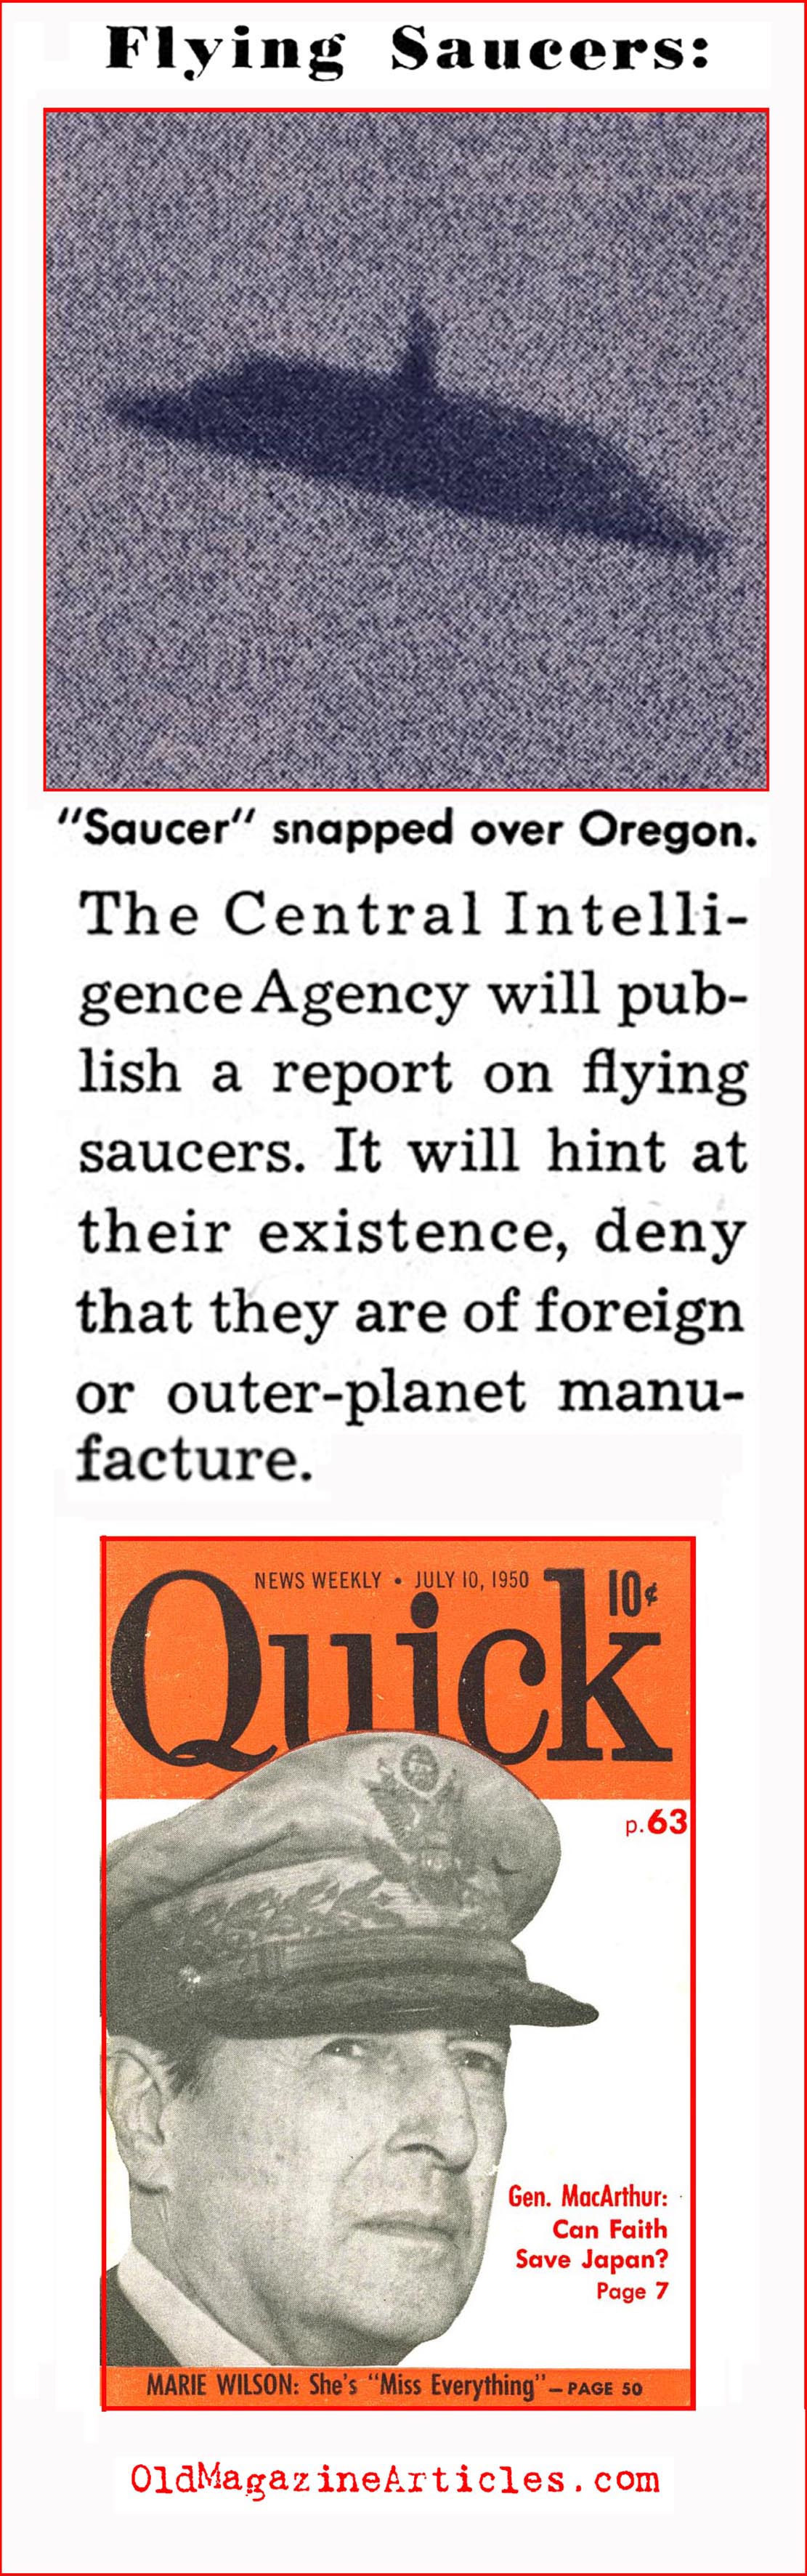 CIA Issues Report on UFO Sightings (Quick Magazine, 1950)